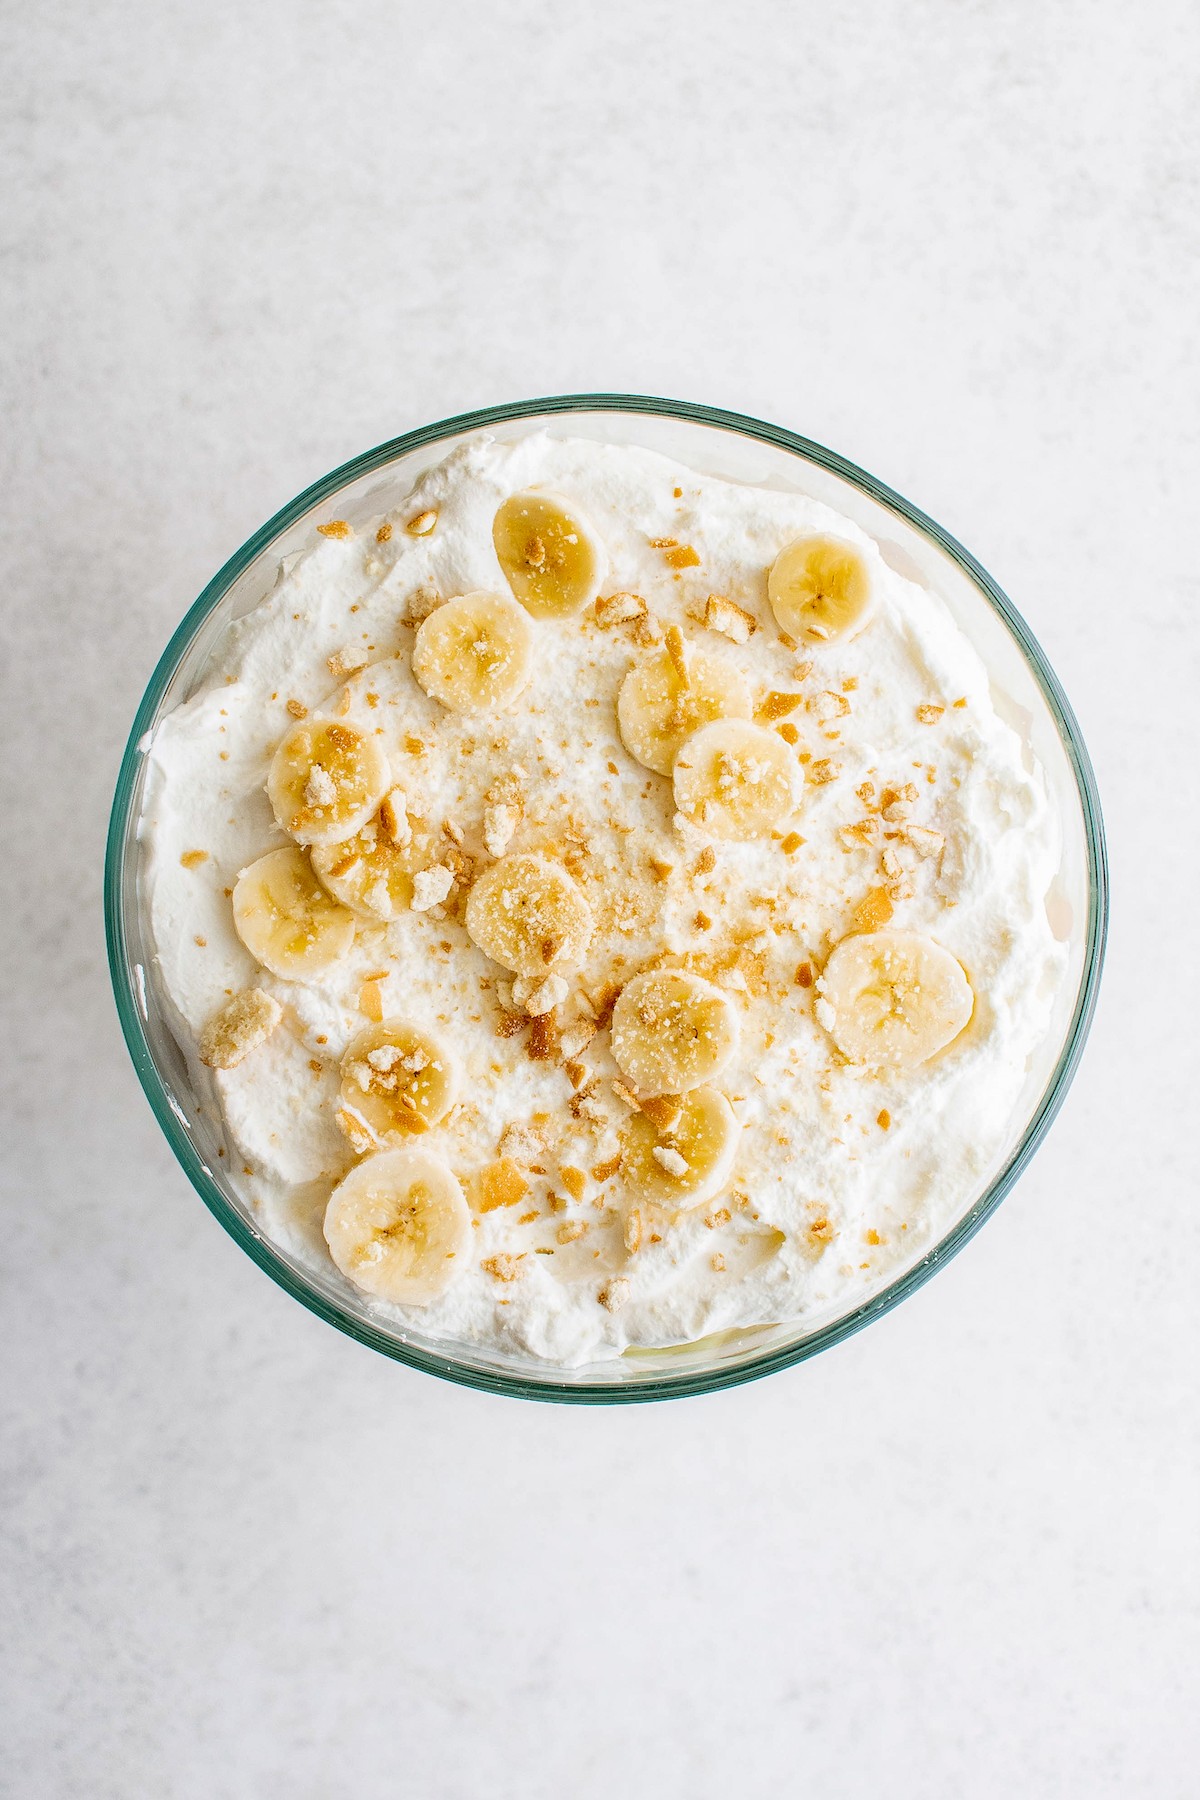 A dessert topped with sliced bananas, whipped cream, and cookie crumbs.